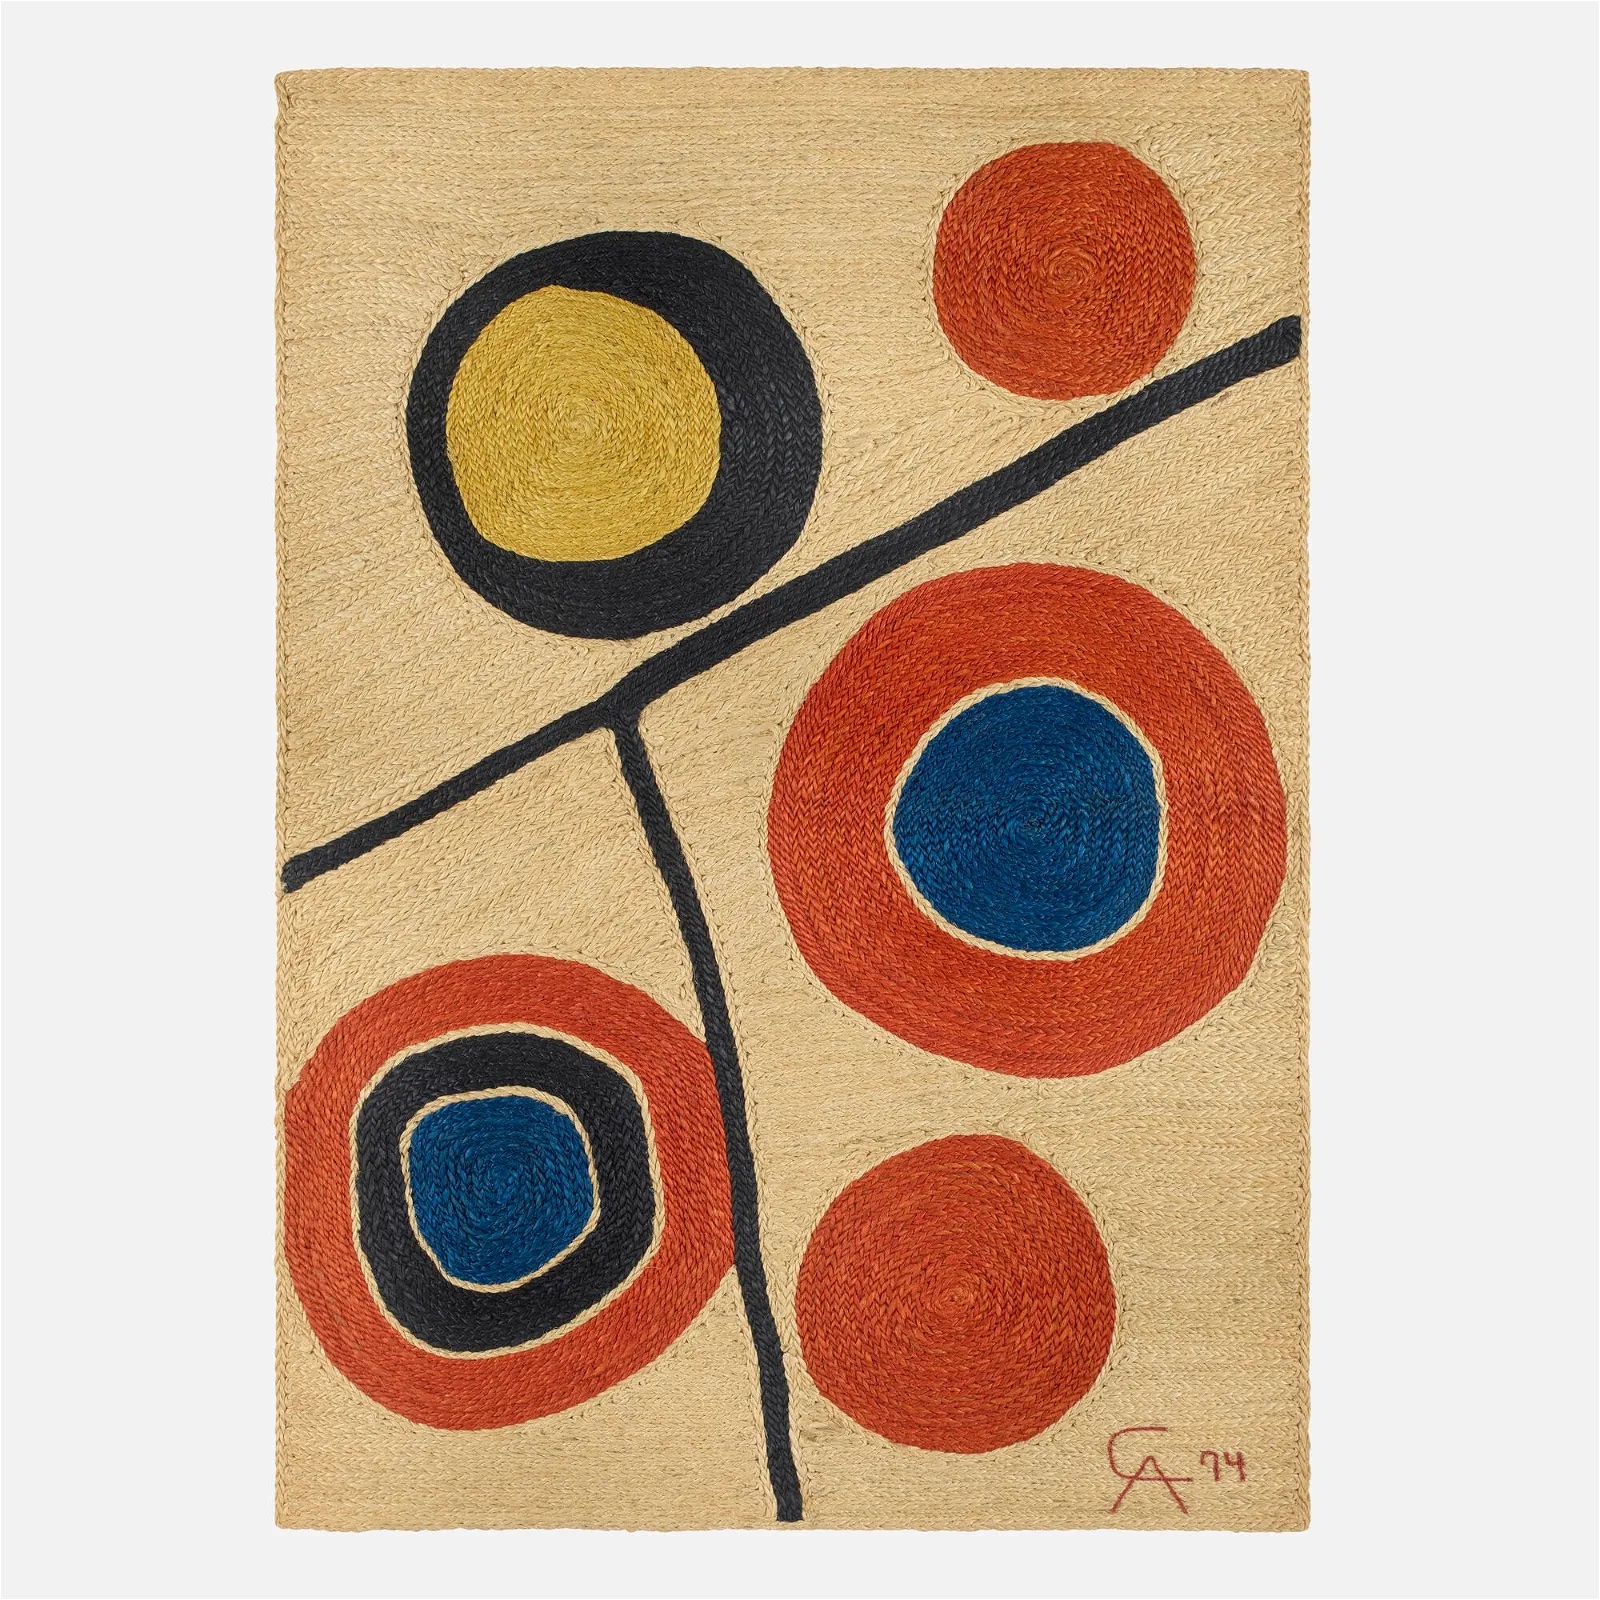 After Alexander Calder, Floating Circles tapestry, which sold for $35,000 ($45,850 with buyer’s premium) at LAMA.